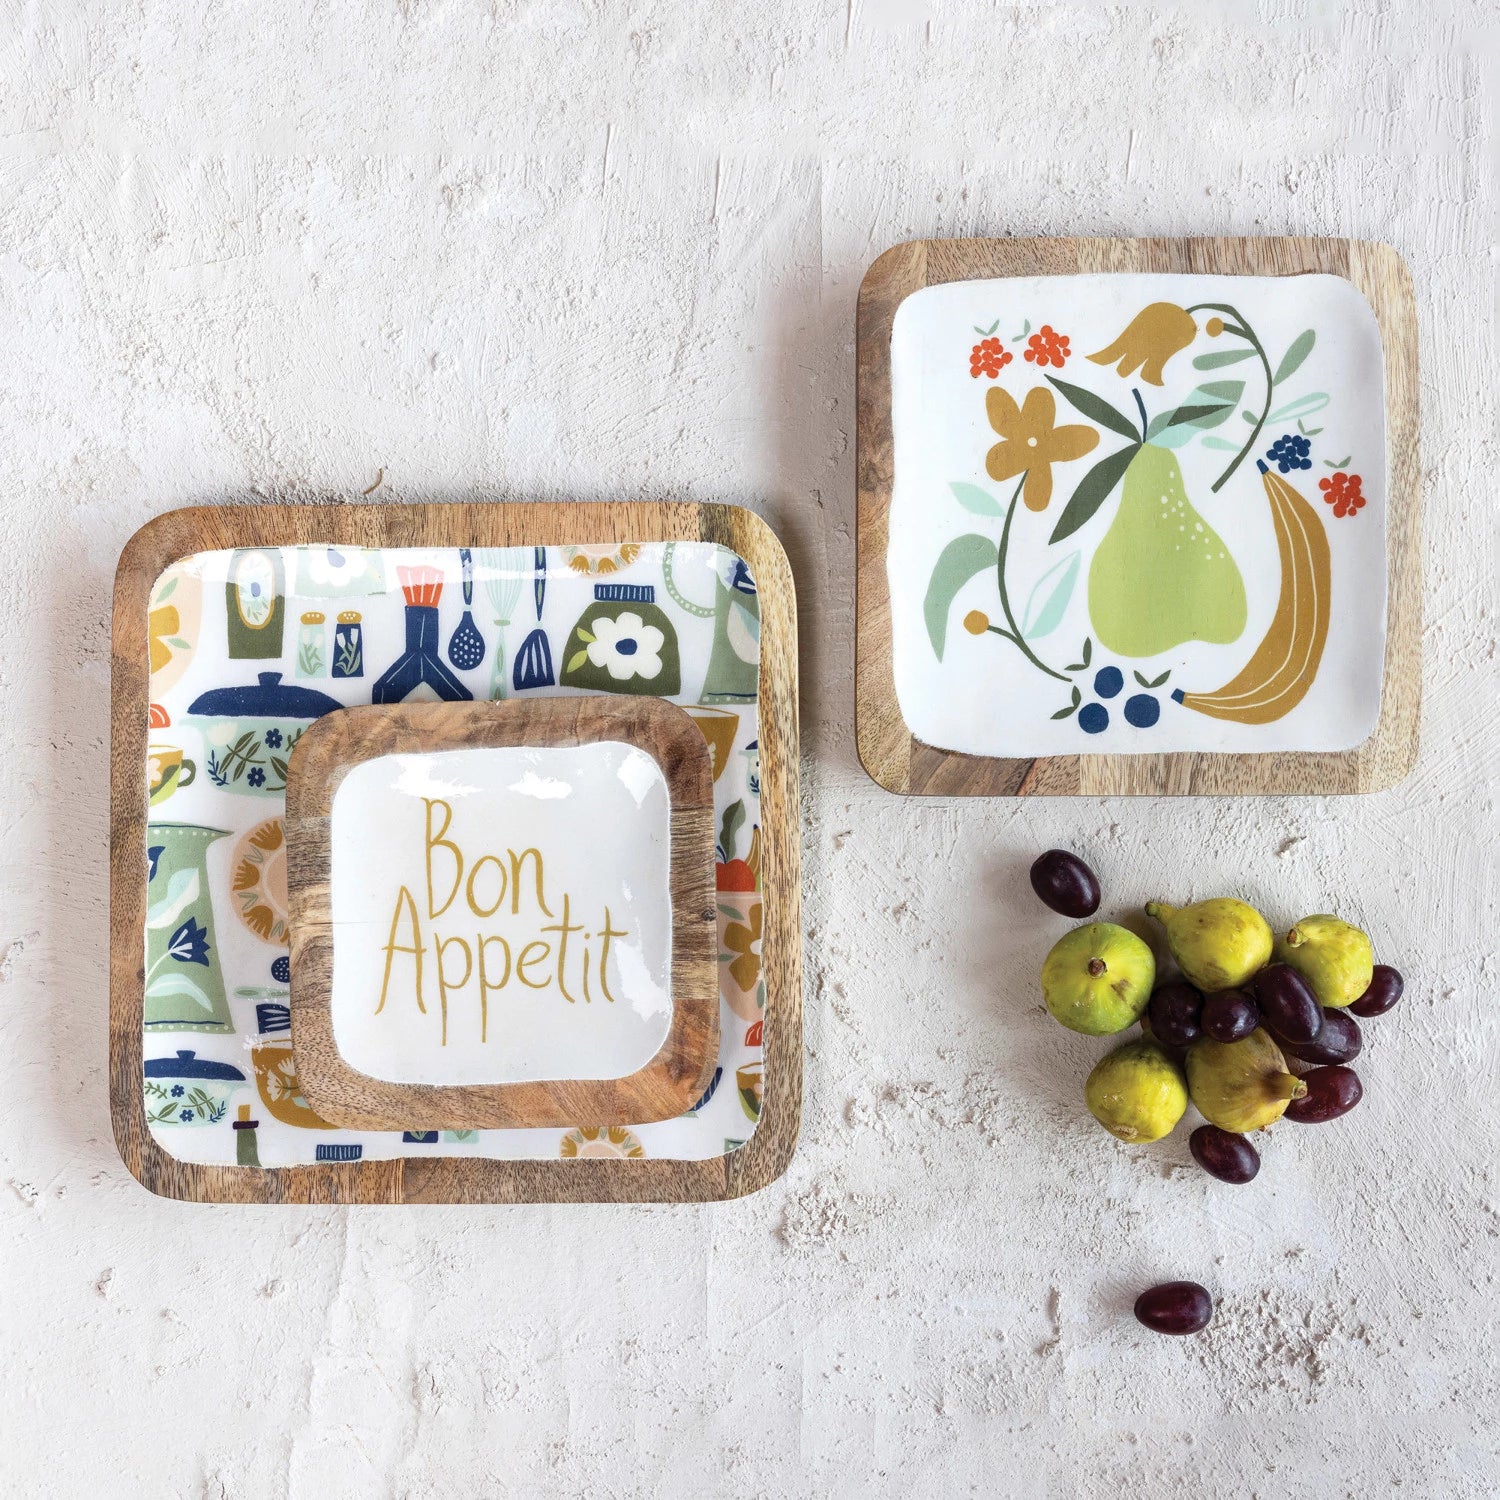 3 styles of enameled mango wood trays arranged on a plaster surface with figs and olives.